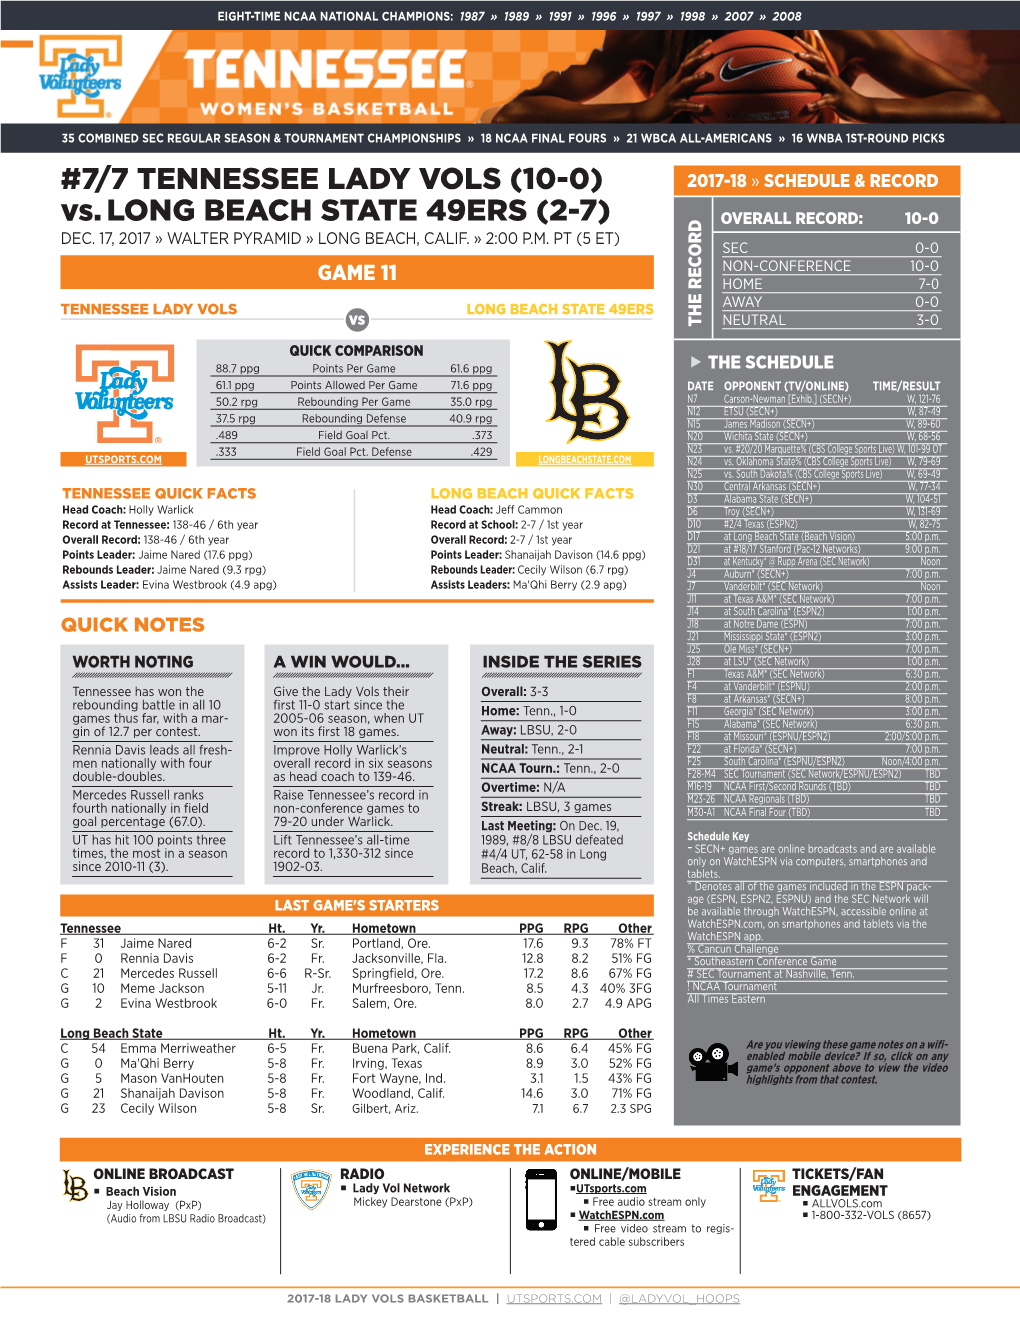 7/7 TENNESSEE LADY VOLS (10-0) Vs.LONG BEACH STATE 49ERS